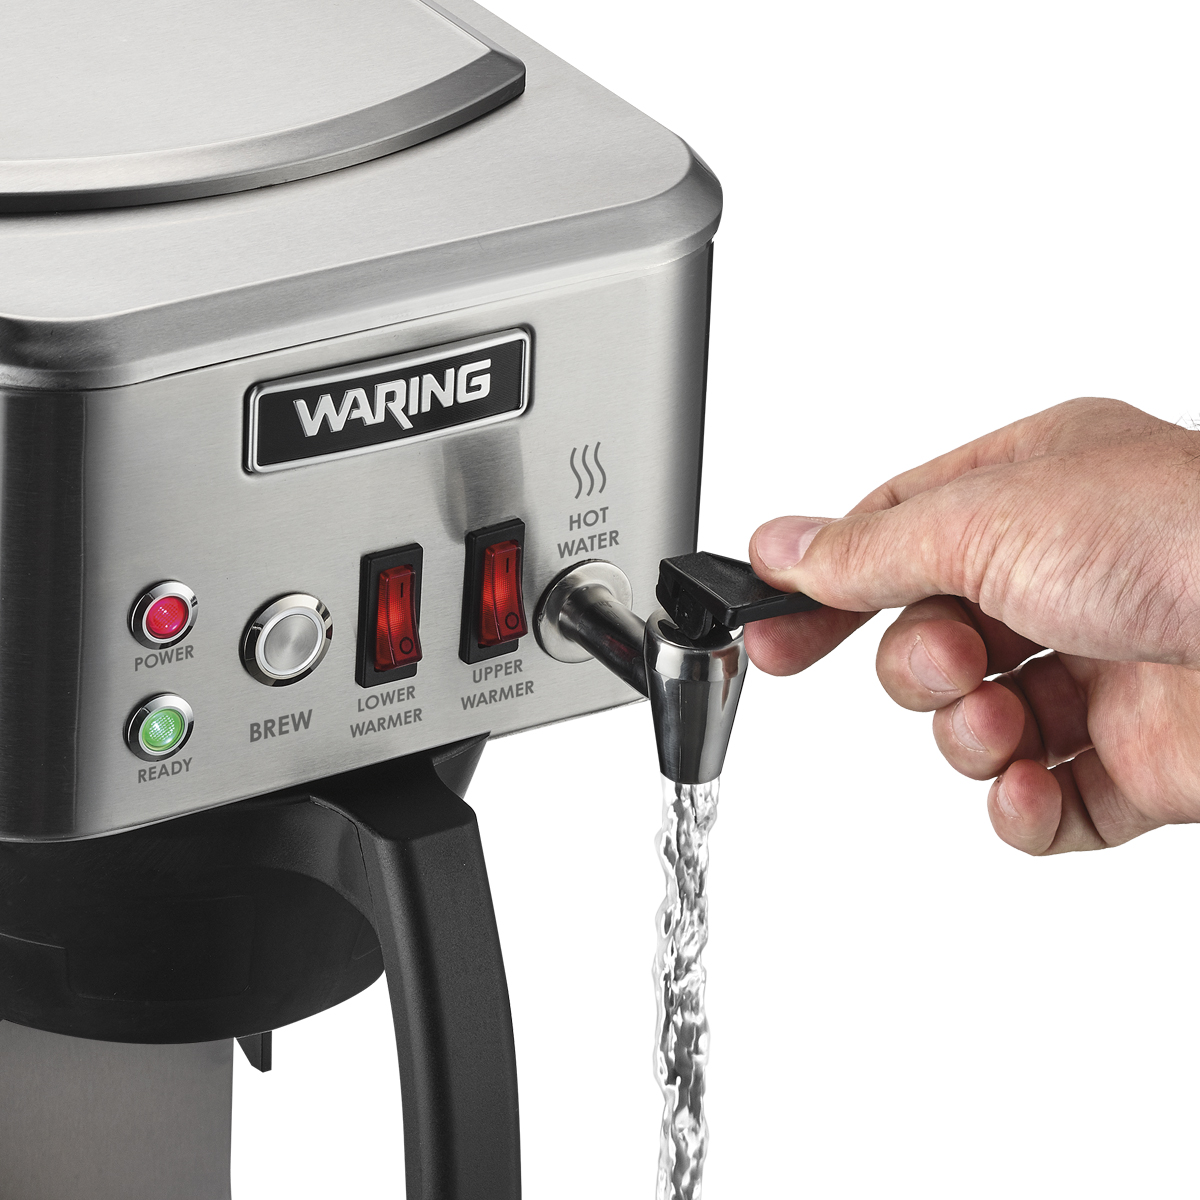 https://www.waringcommercialproducts.com/files/products/wcm50p-cafe-deco-automatic-coffee-brewer-inset-4-1200x1200.jpg